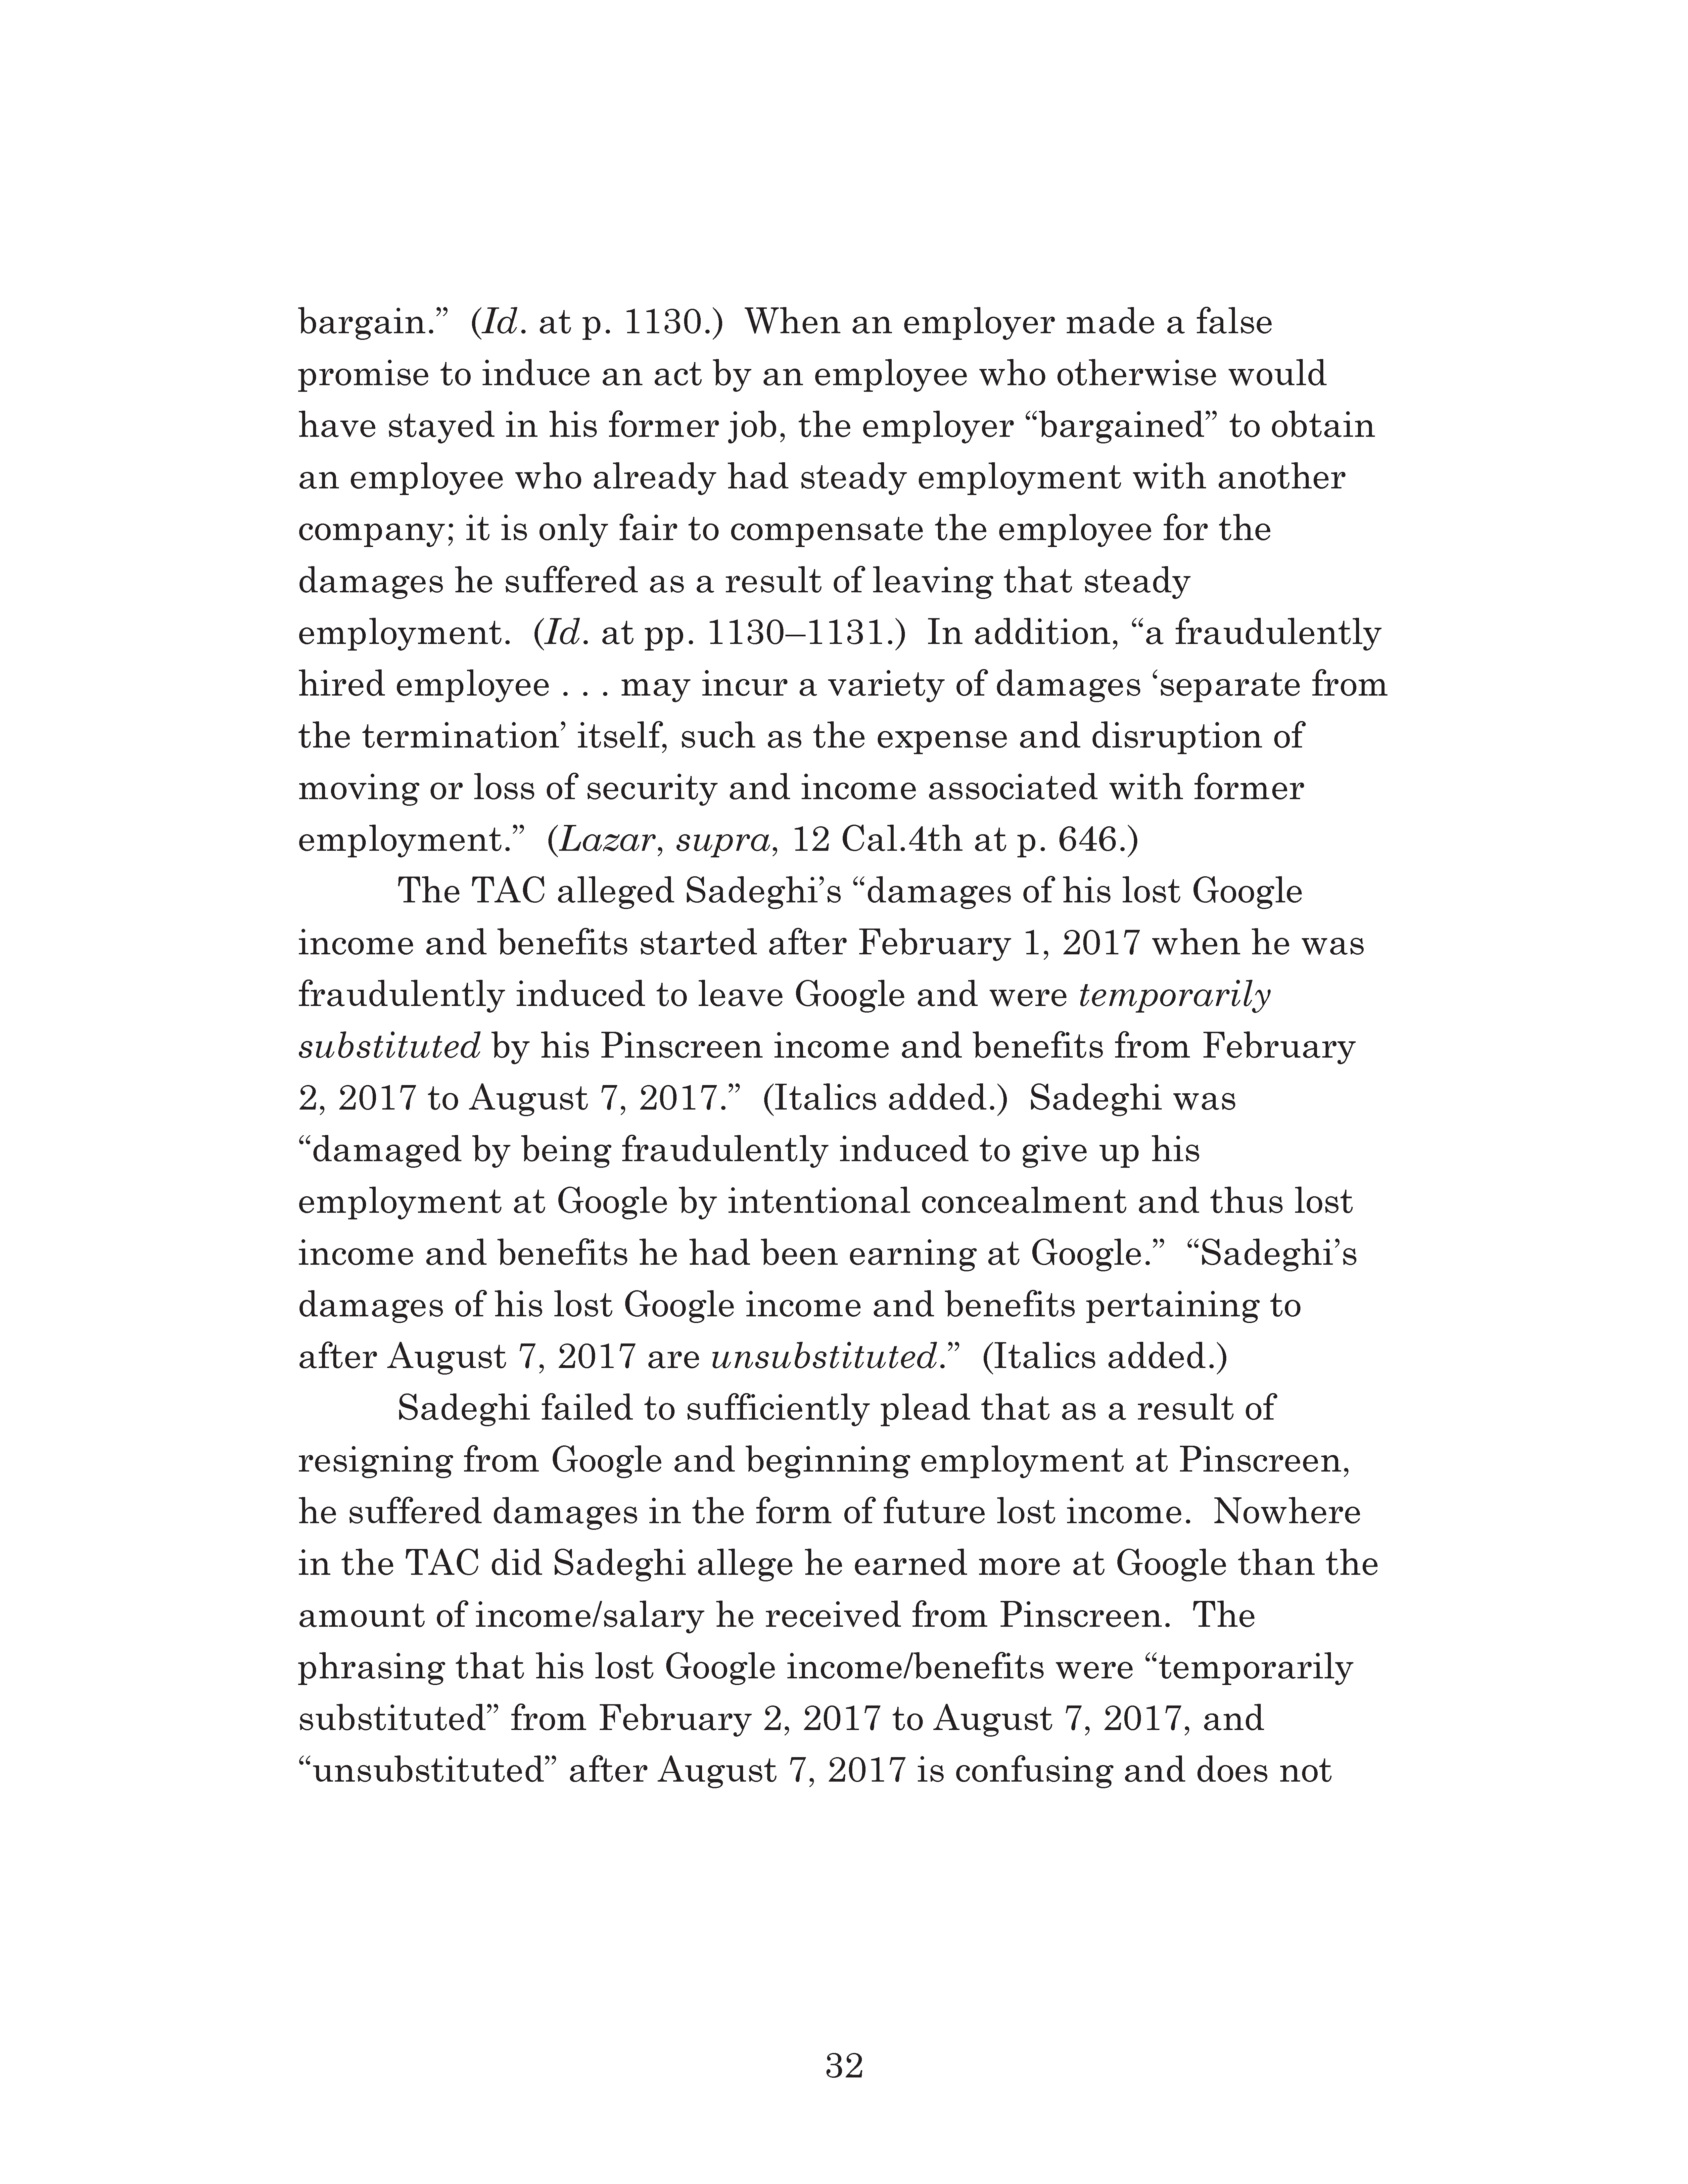 Appellate Court's Opinion Upholding Sadeghi's Claims for Fraud, Battery and IIED Against Li Page 32